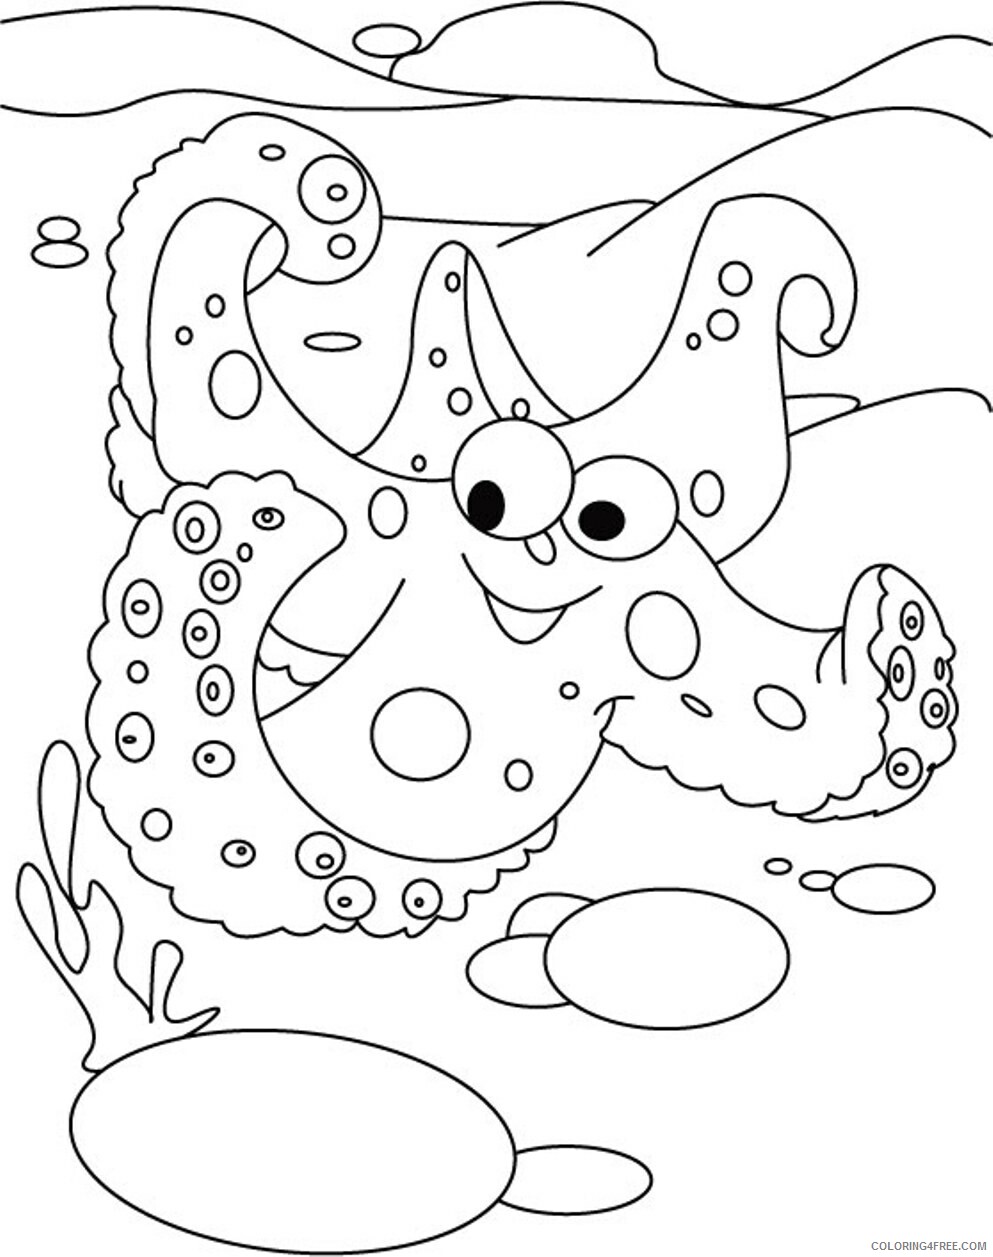 Starfish Coloring Pages Animal Printable Sheets Starfish Pictures to 2021 4710 Coloring4free